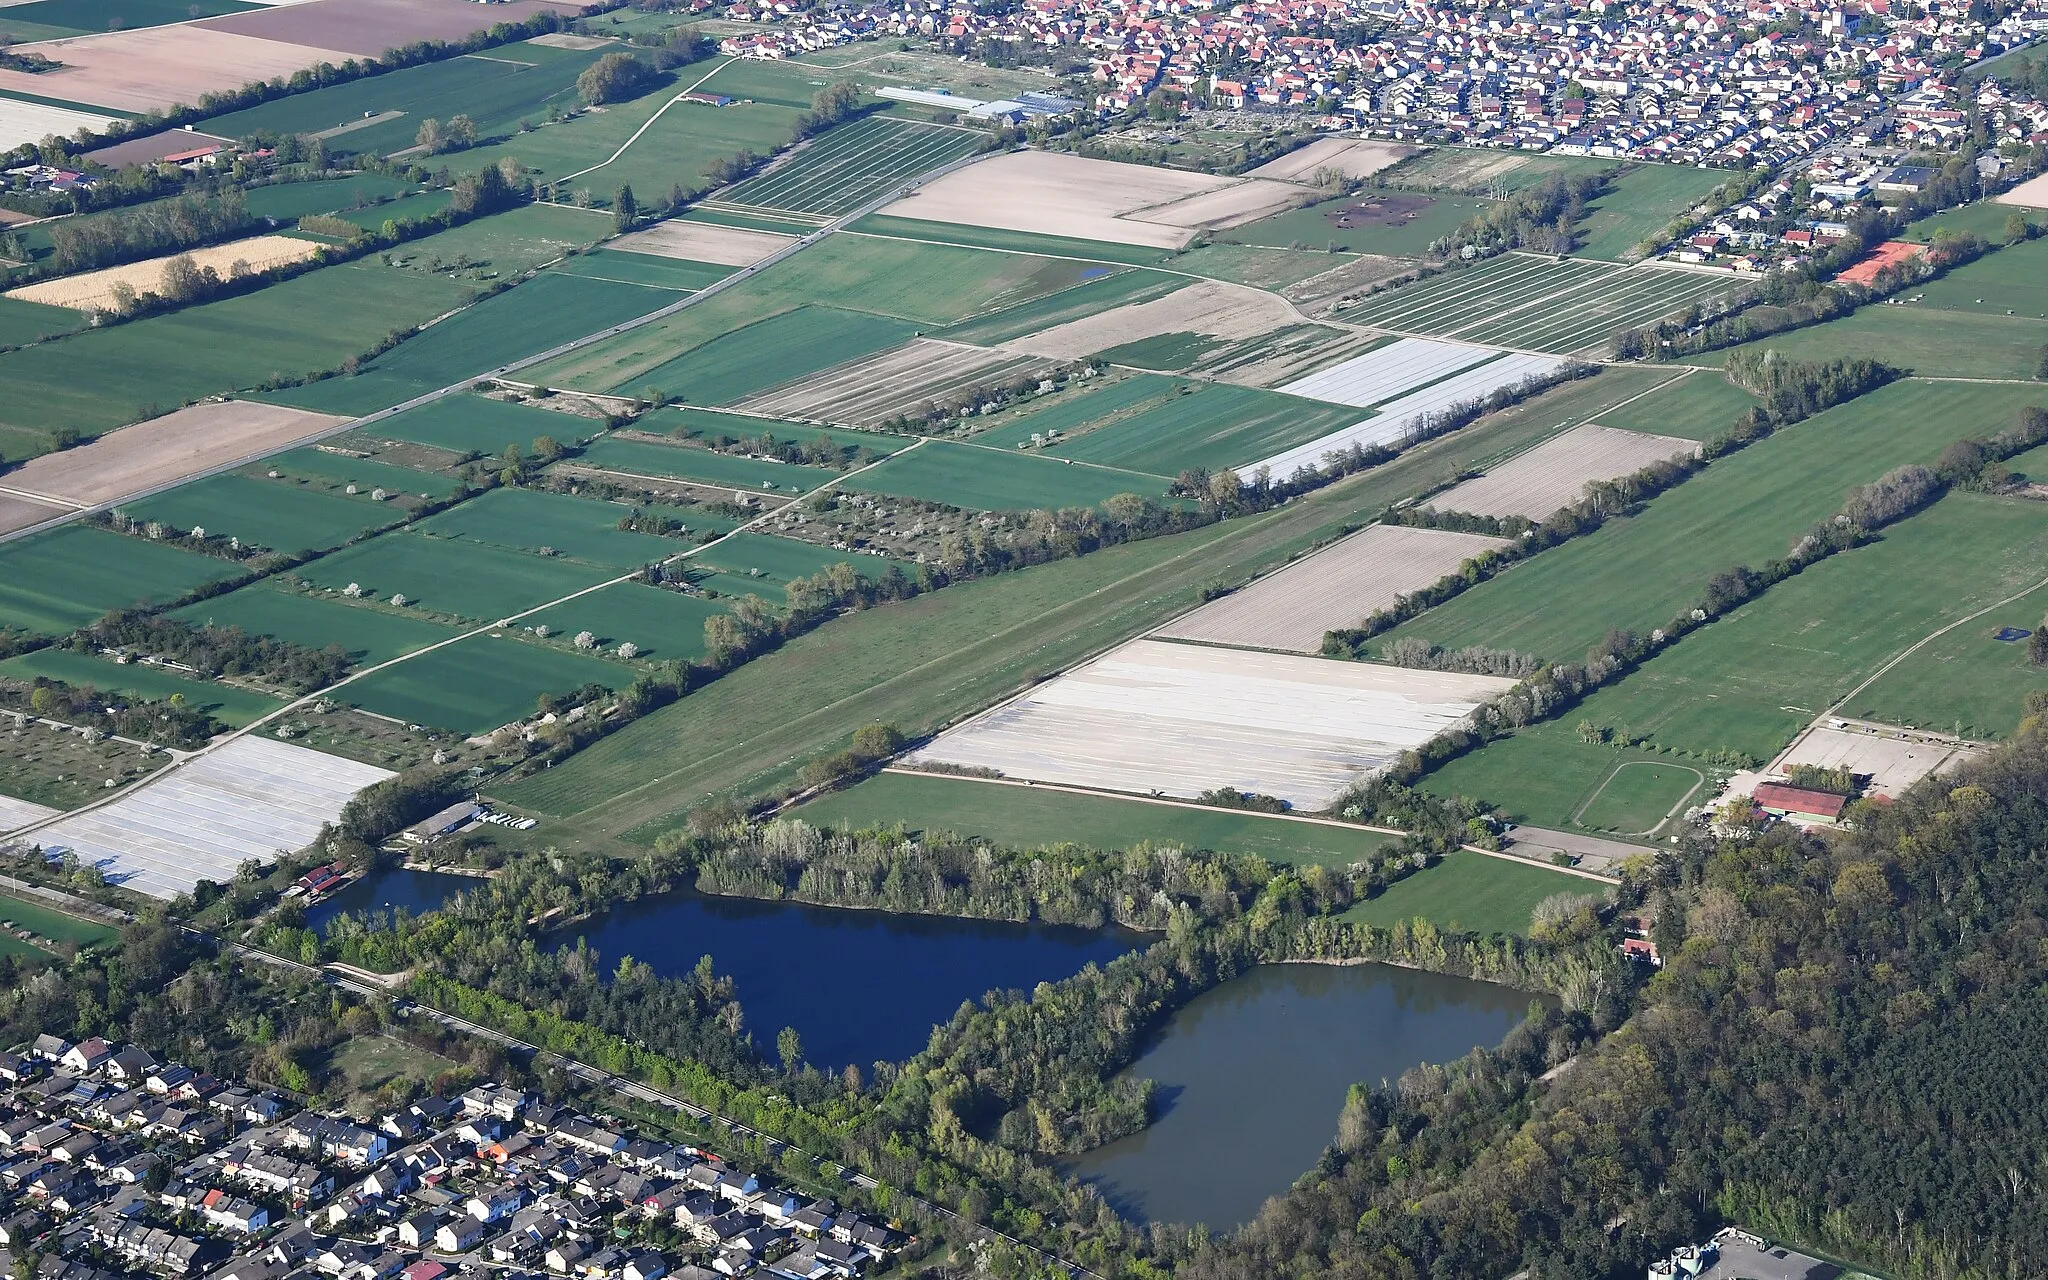 Photo showing: Aerial image of the Haßloch gliding site